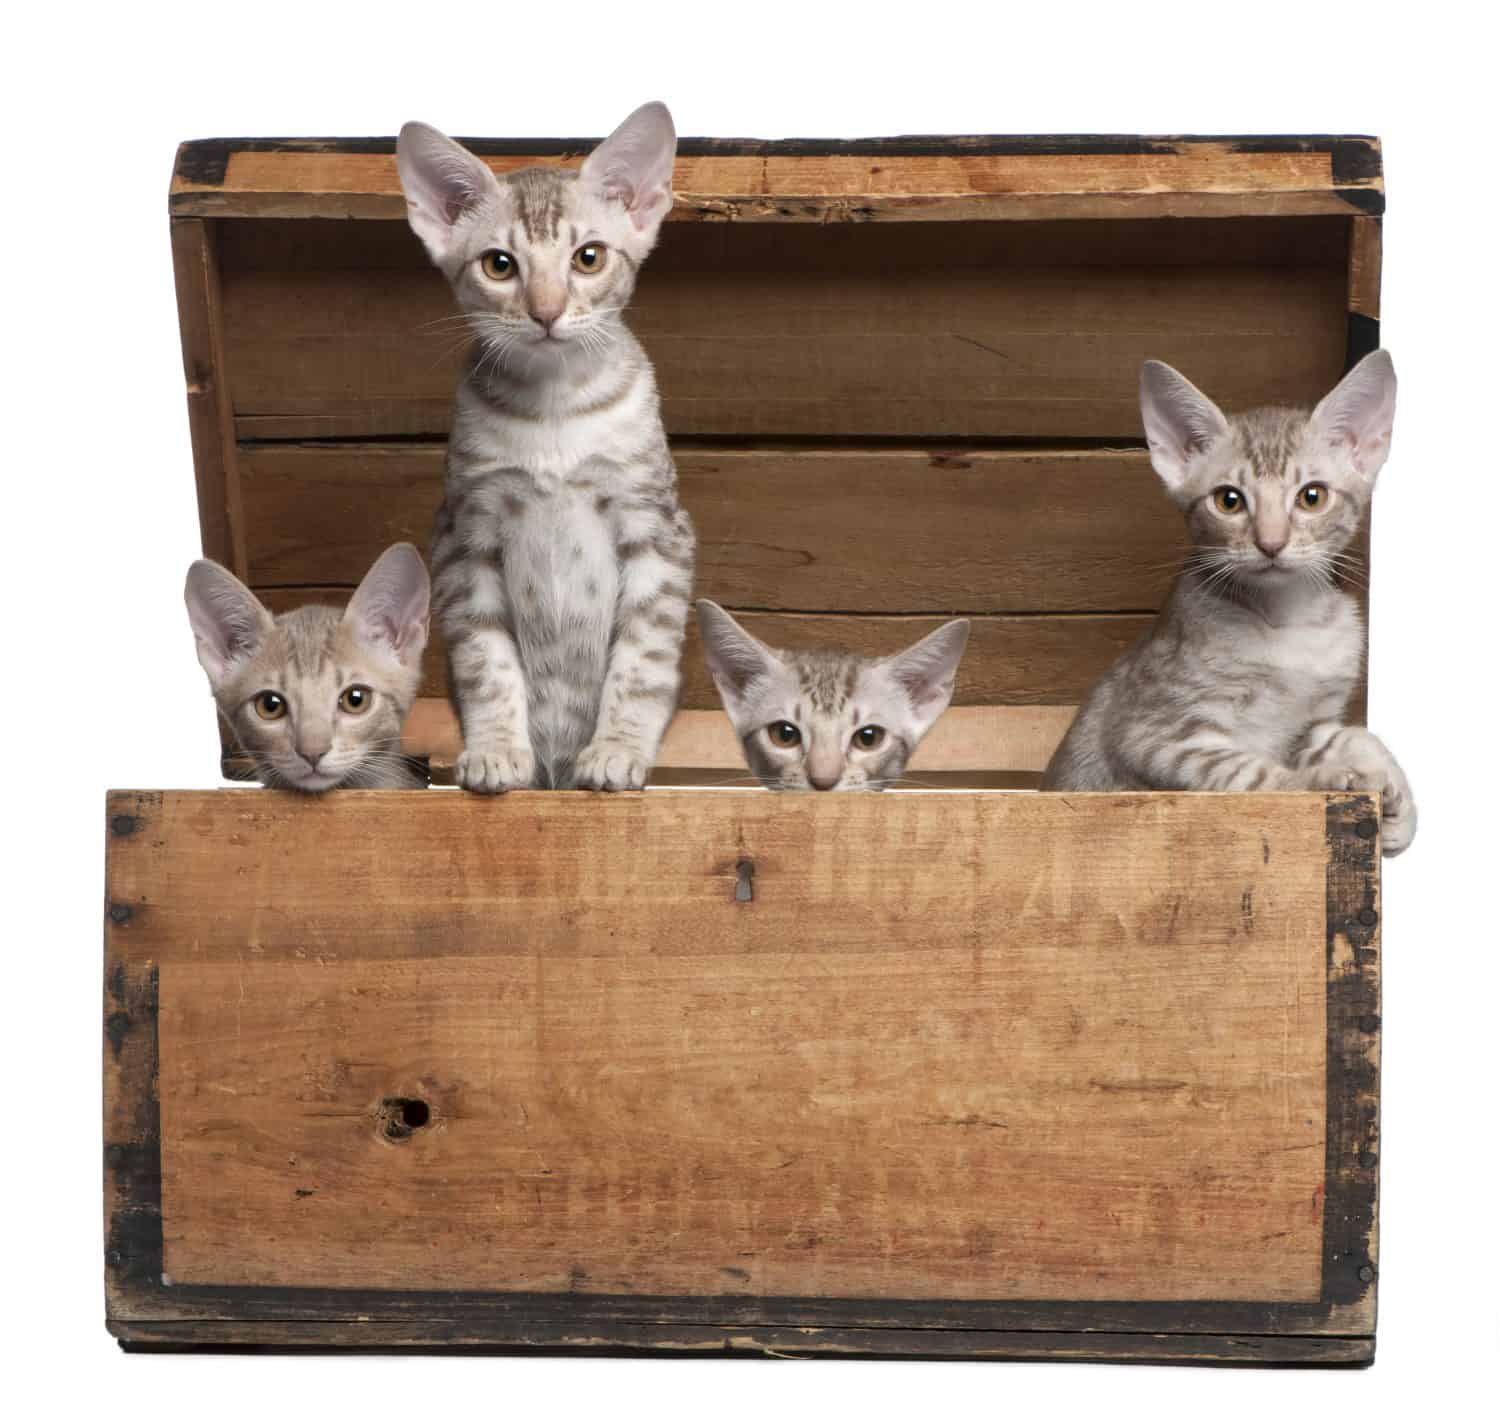 Ocicat kittens, 13 weeks old, emerging from a wooden box in front of white background